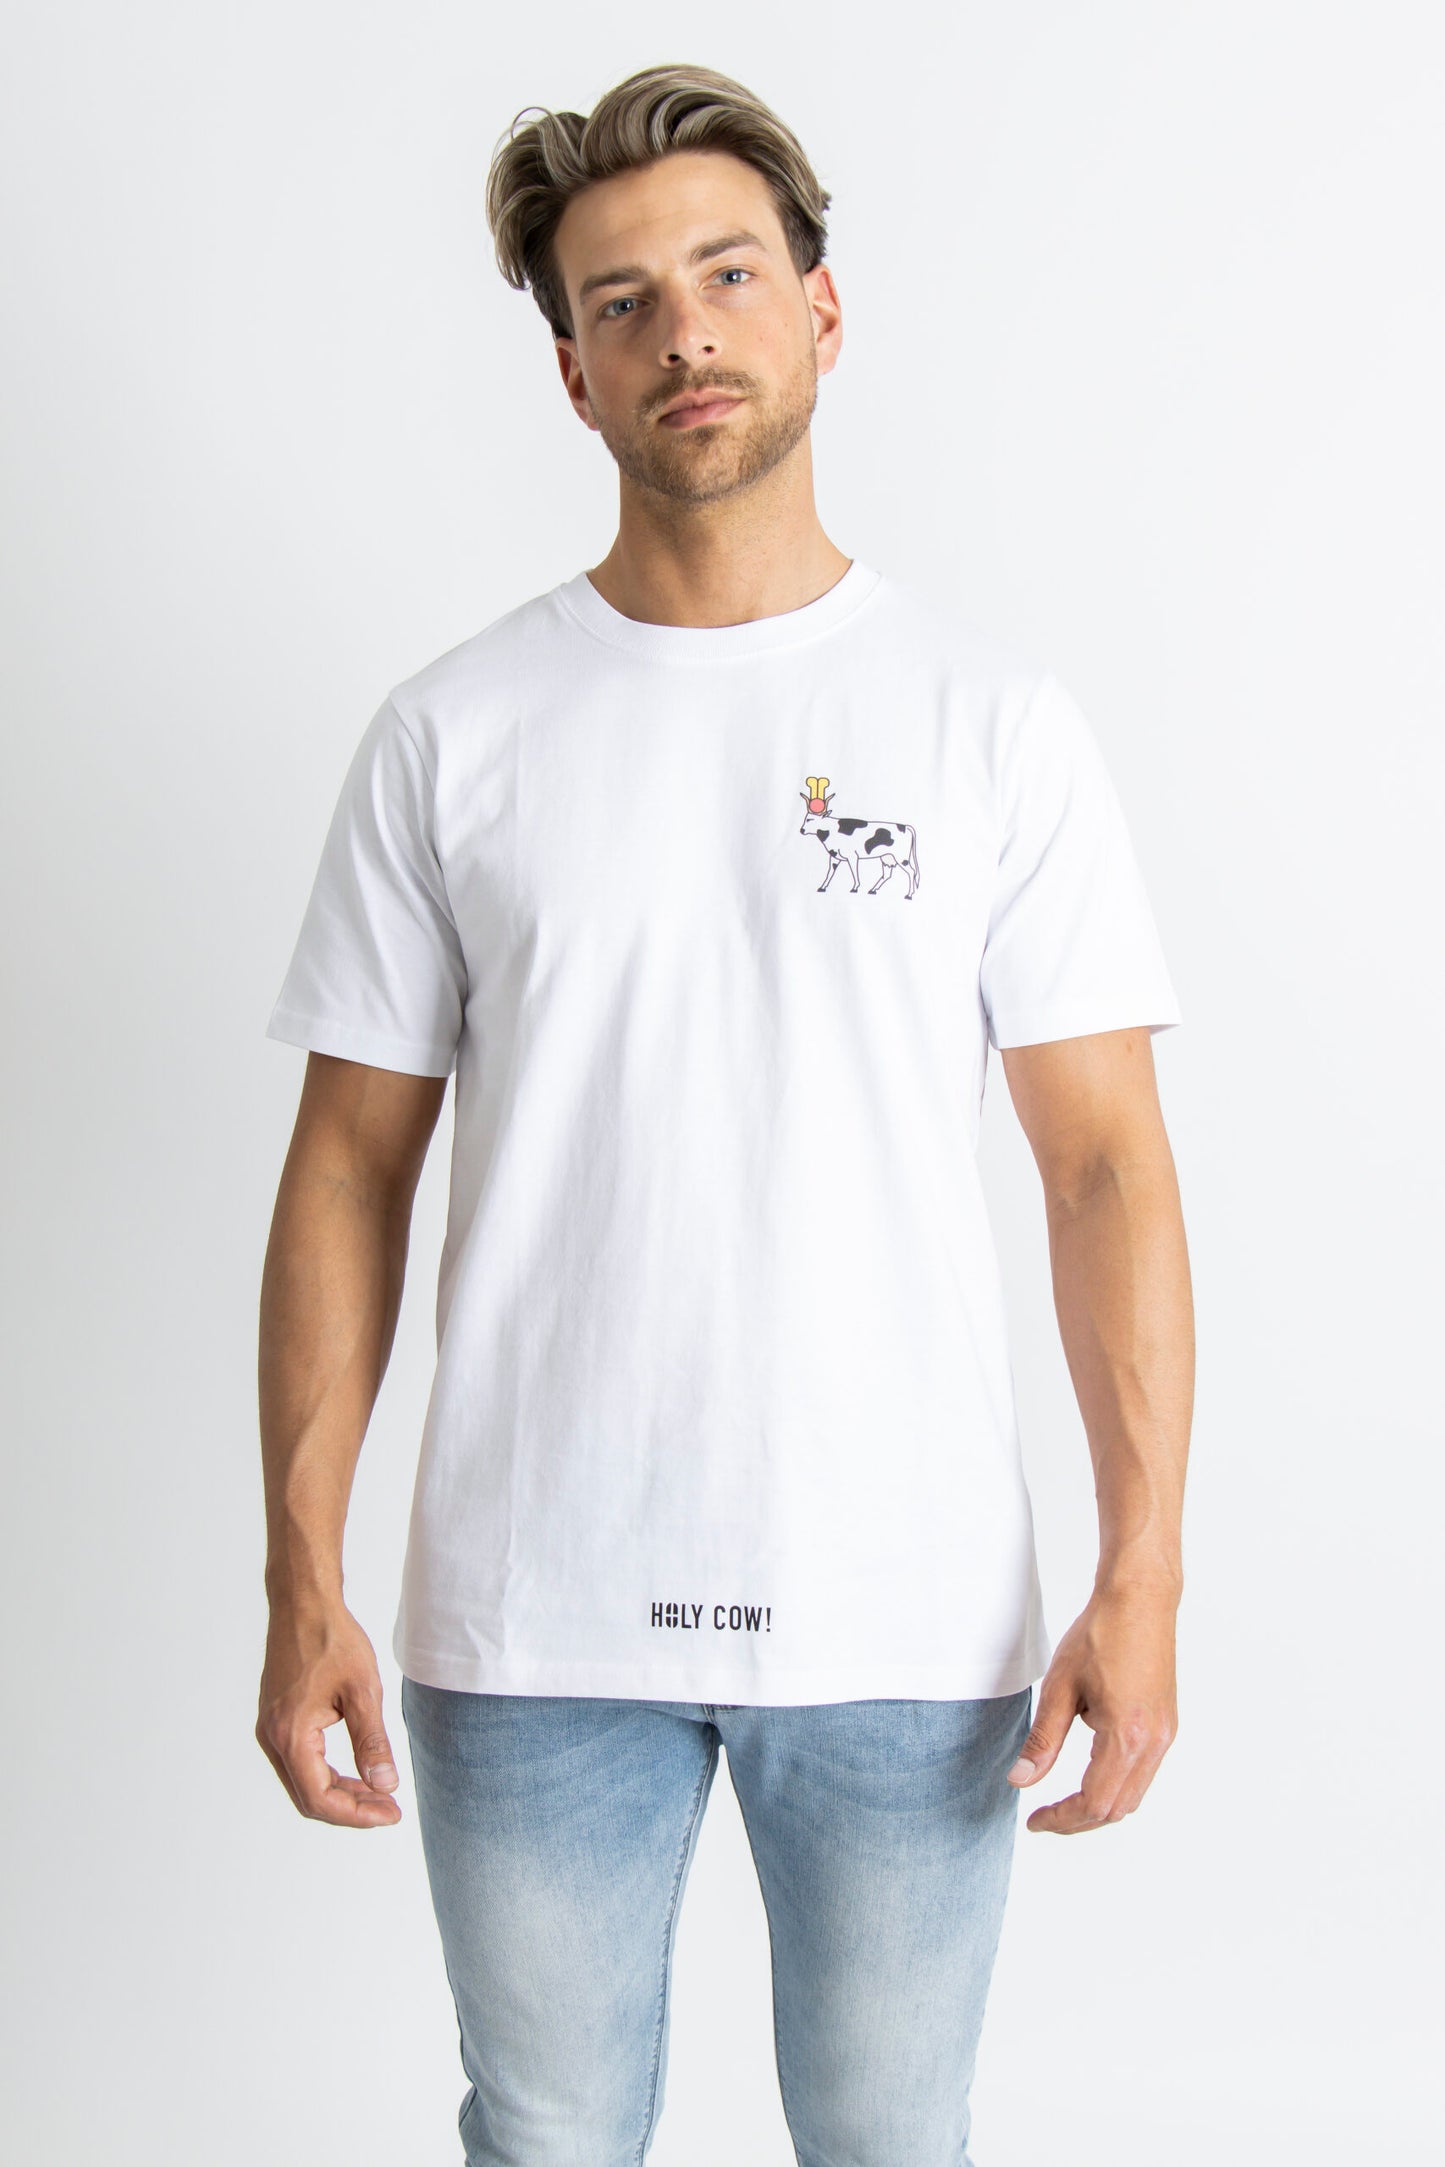 Holy cow! white t-shirt